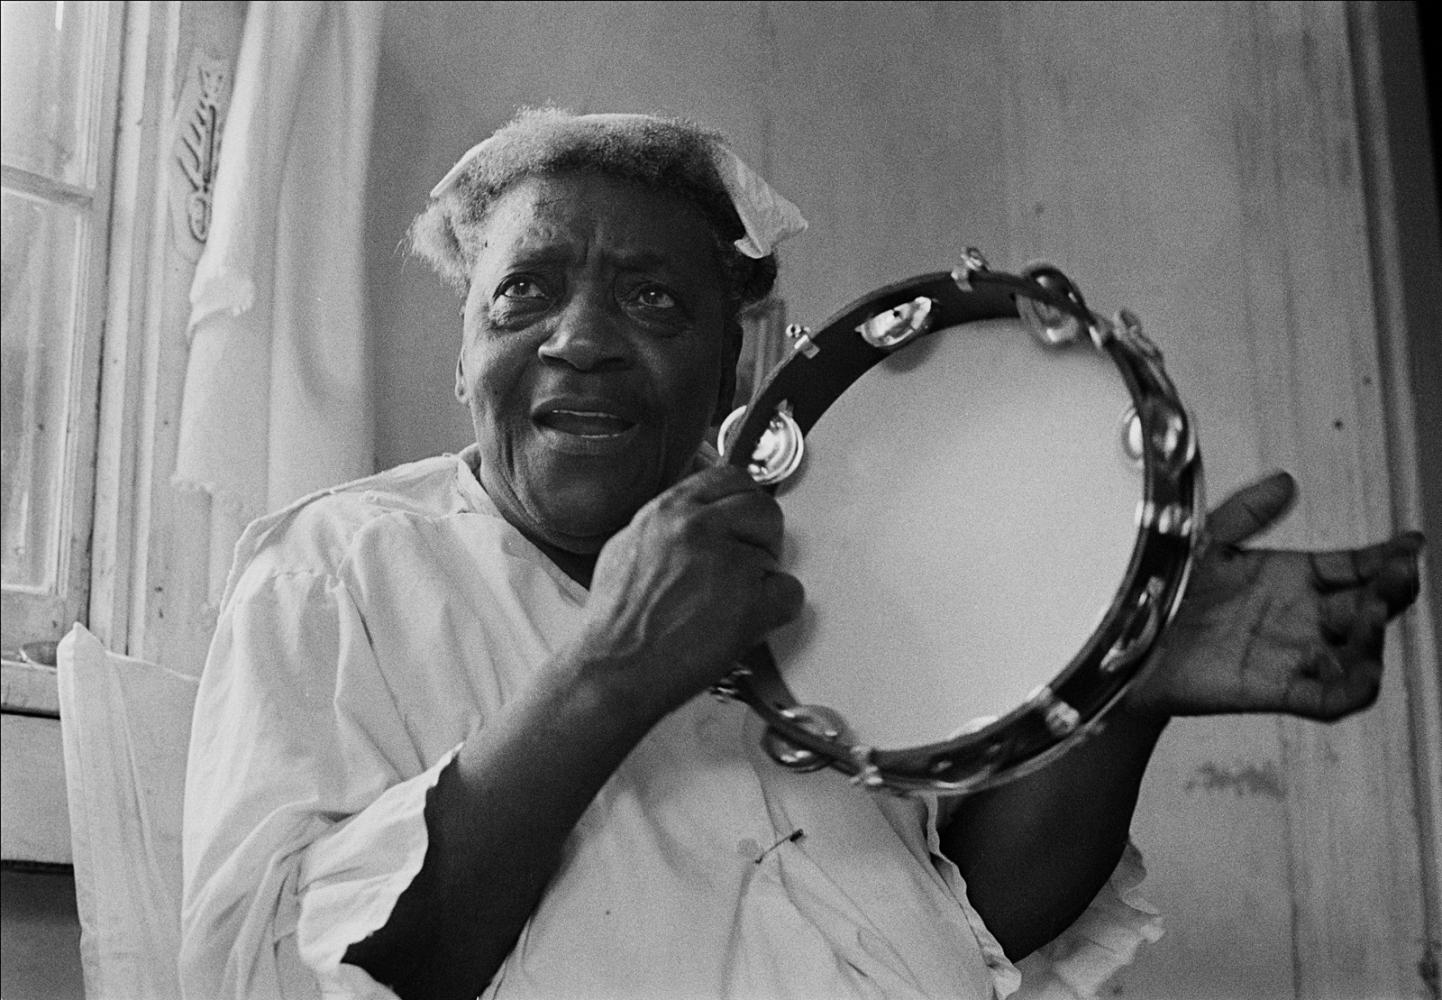 Sister Gertrude Morgan, New Orleans, LA, 1974, was a self taught artist, evangelist, musician and poet, who often used a multidisciplinary approach to express her religious &nbsp;faith. New Orleans. Louisiana